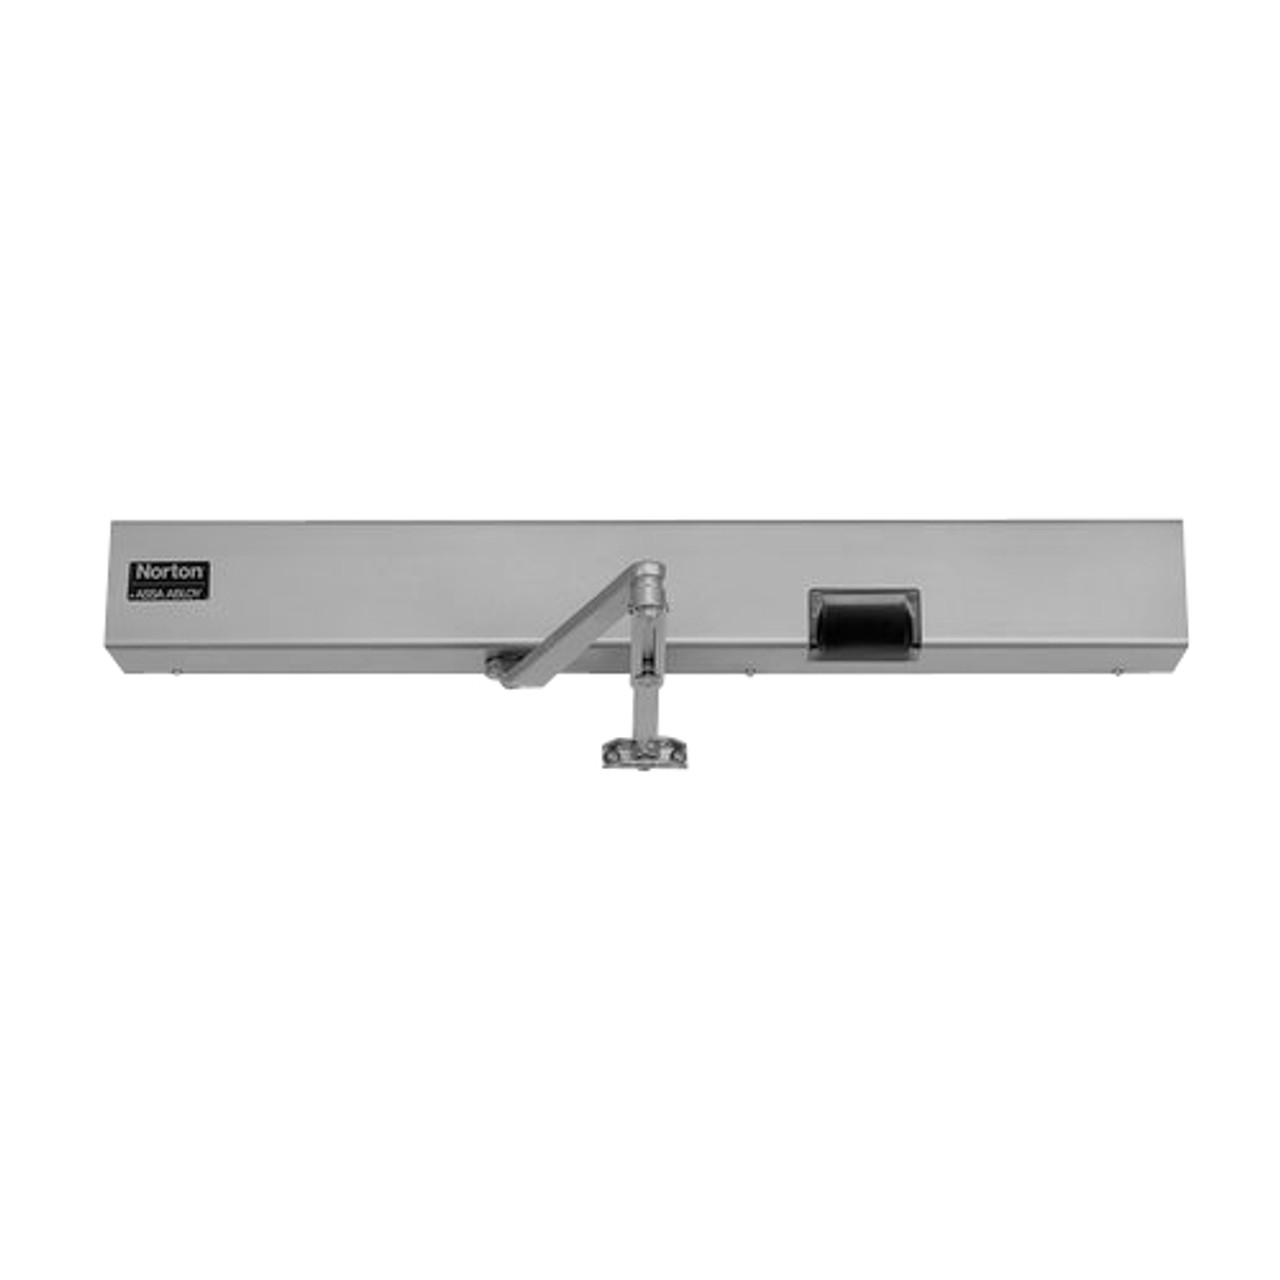 7124SZ-RH-120VAC-689 Norton 7100SZ Series Safe Zone Multi-Point Closer/Holder with Motion Sensor and Push Side Double Lever 11 inch Main Arm in Aluminum Finish